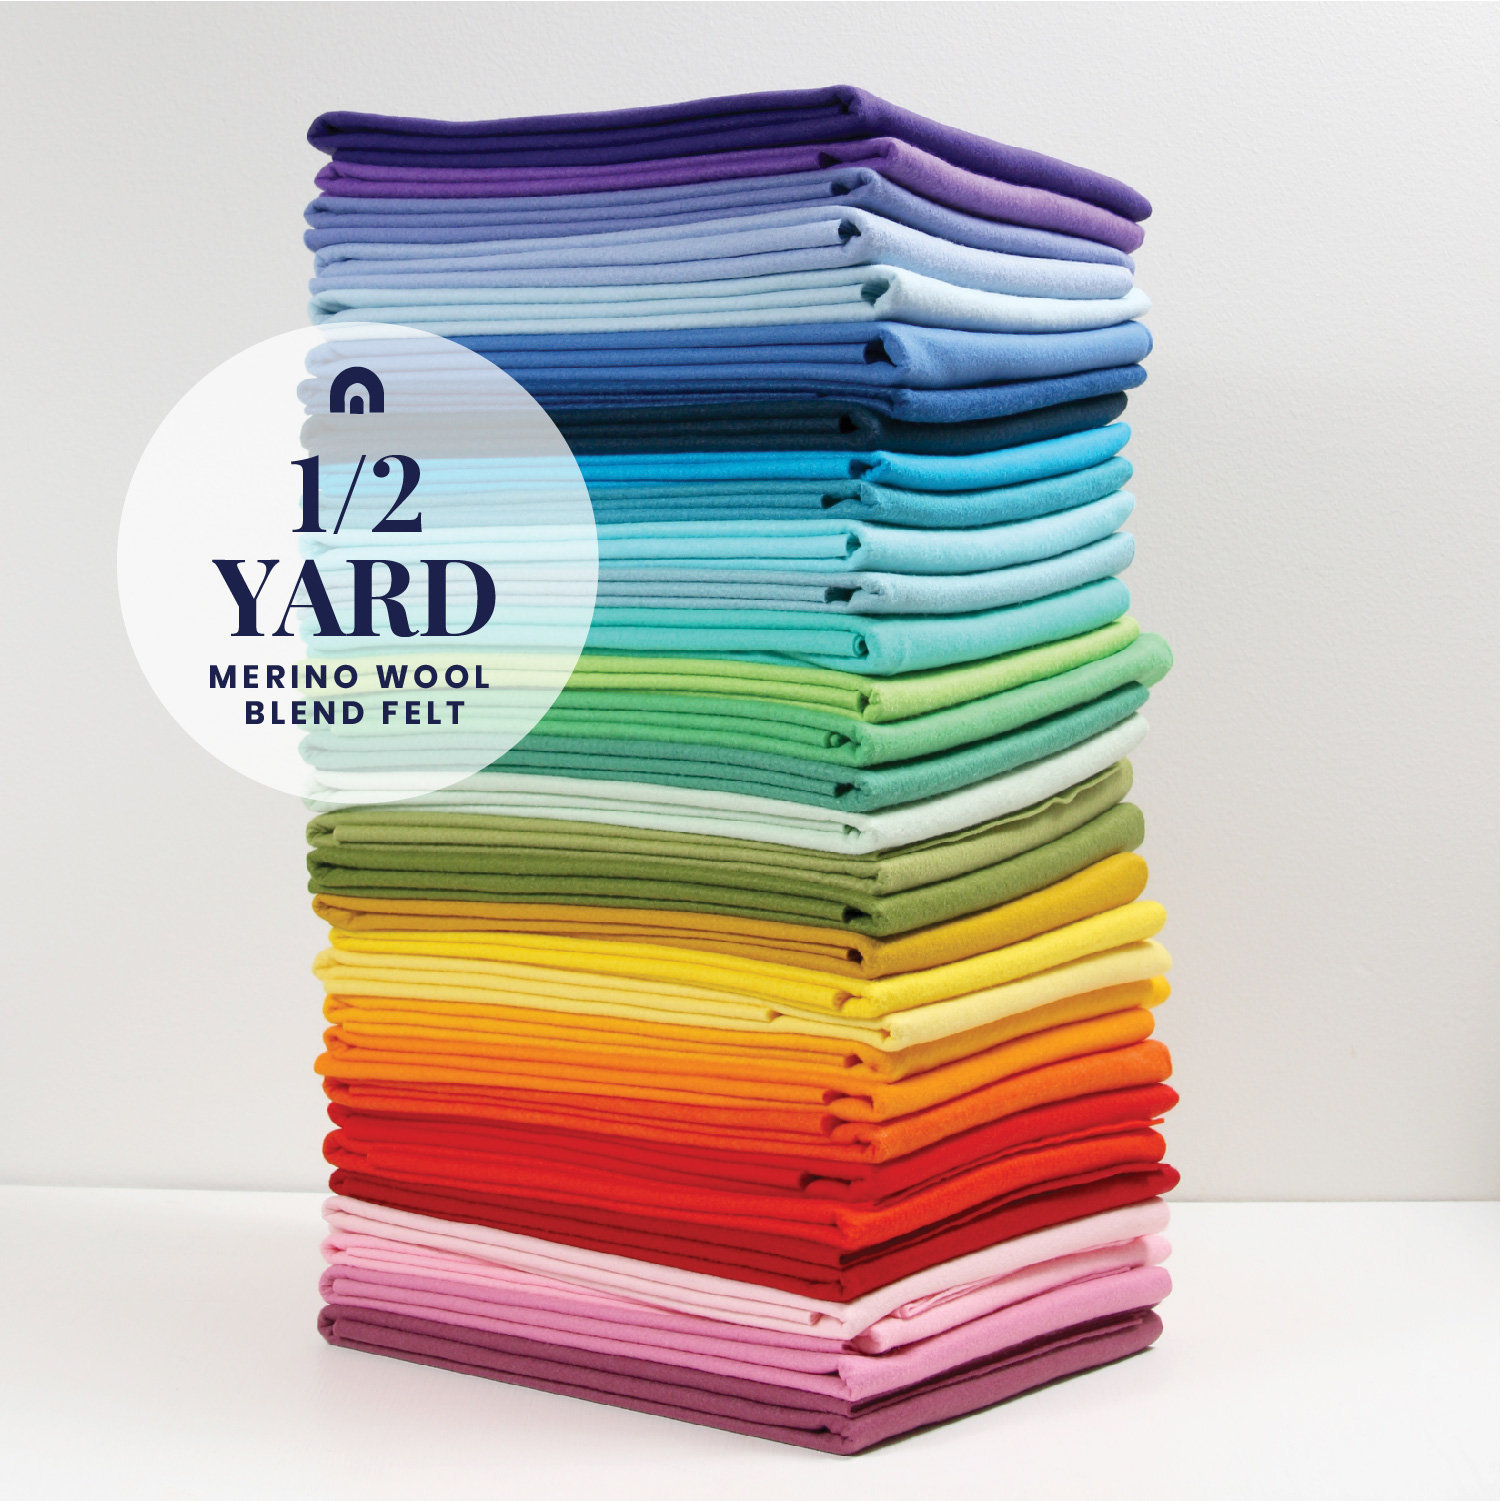 Wool Fabric Online By The Yard